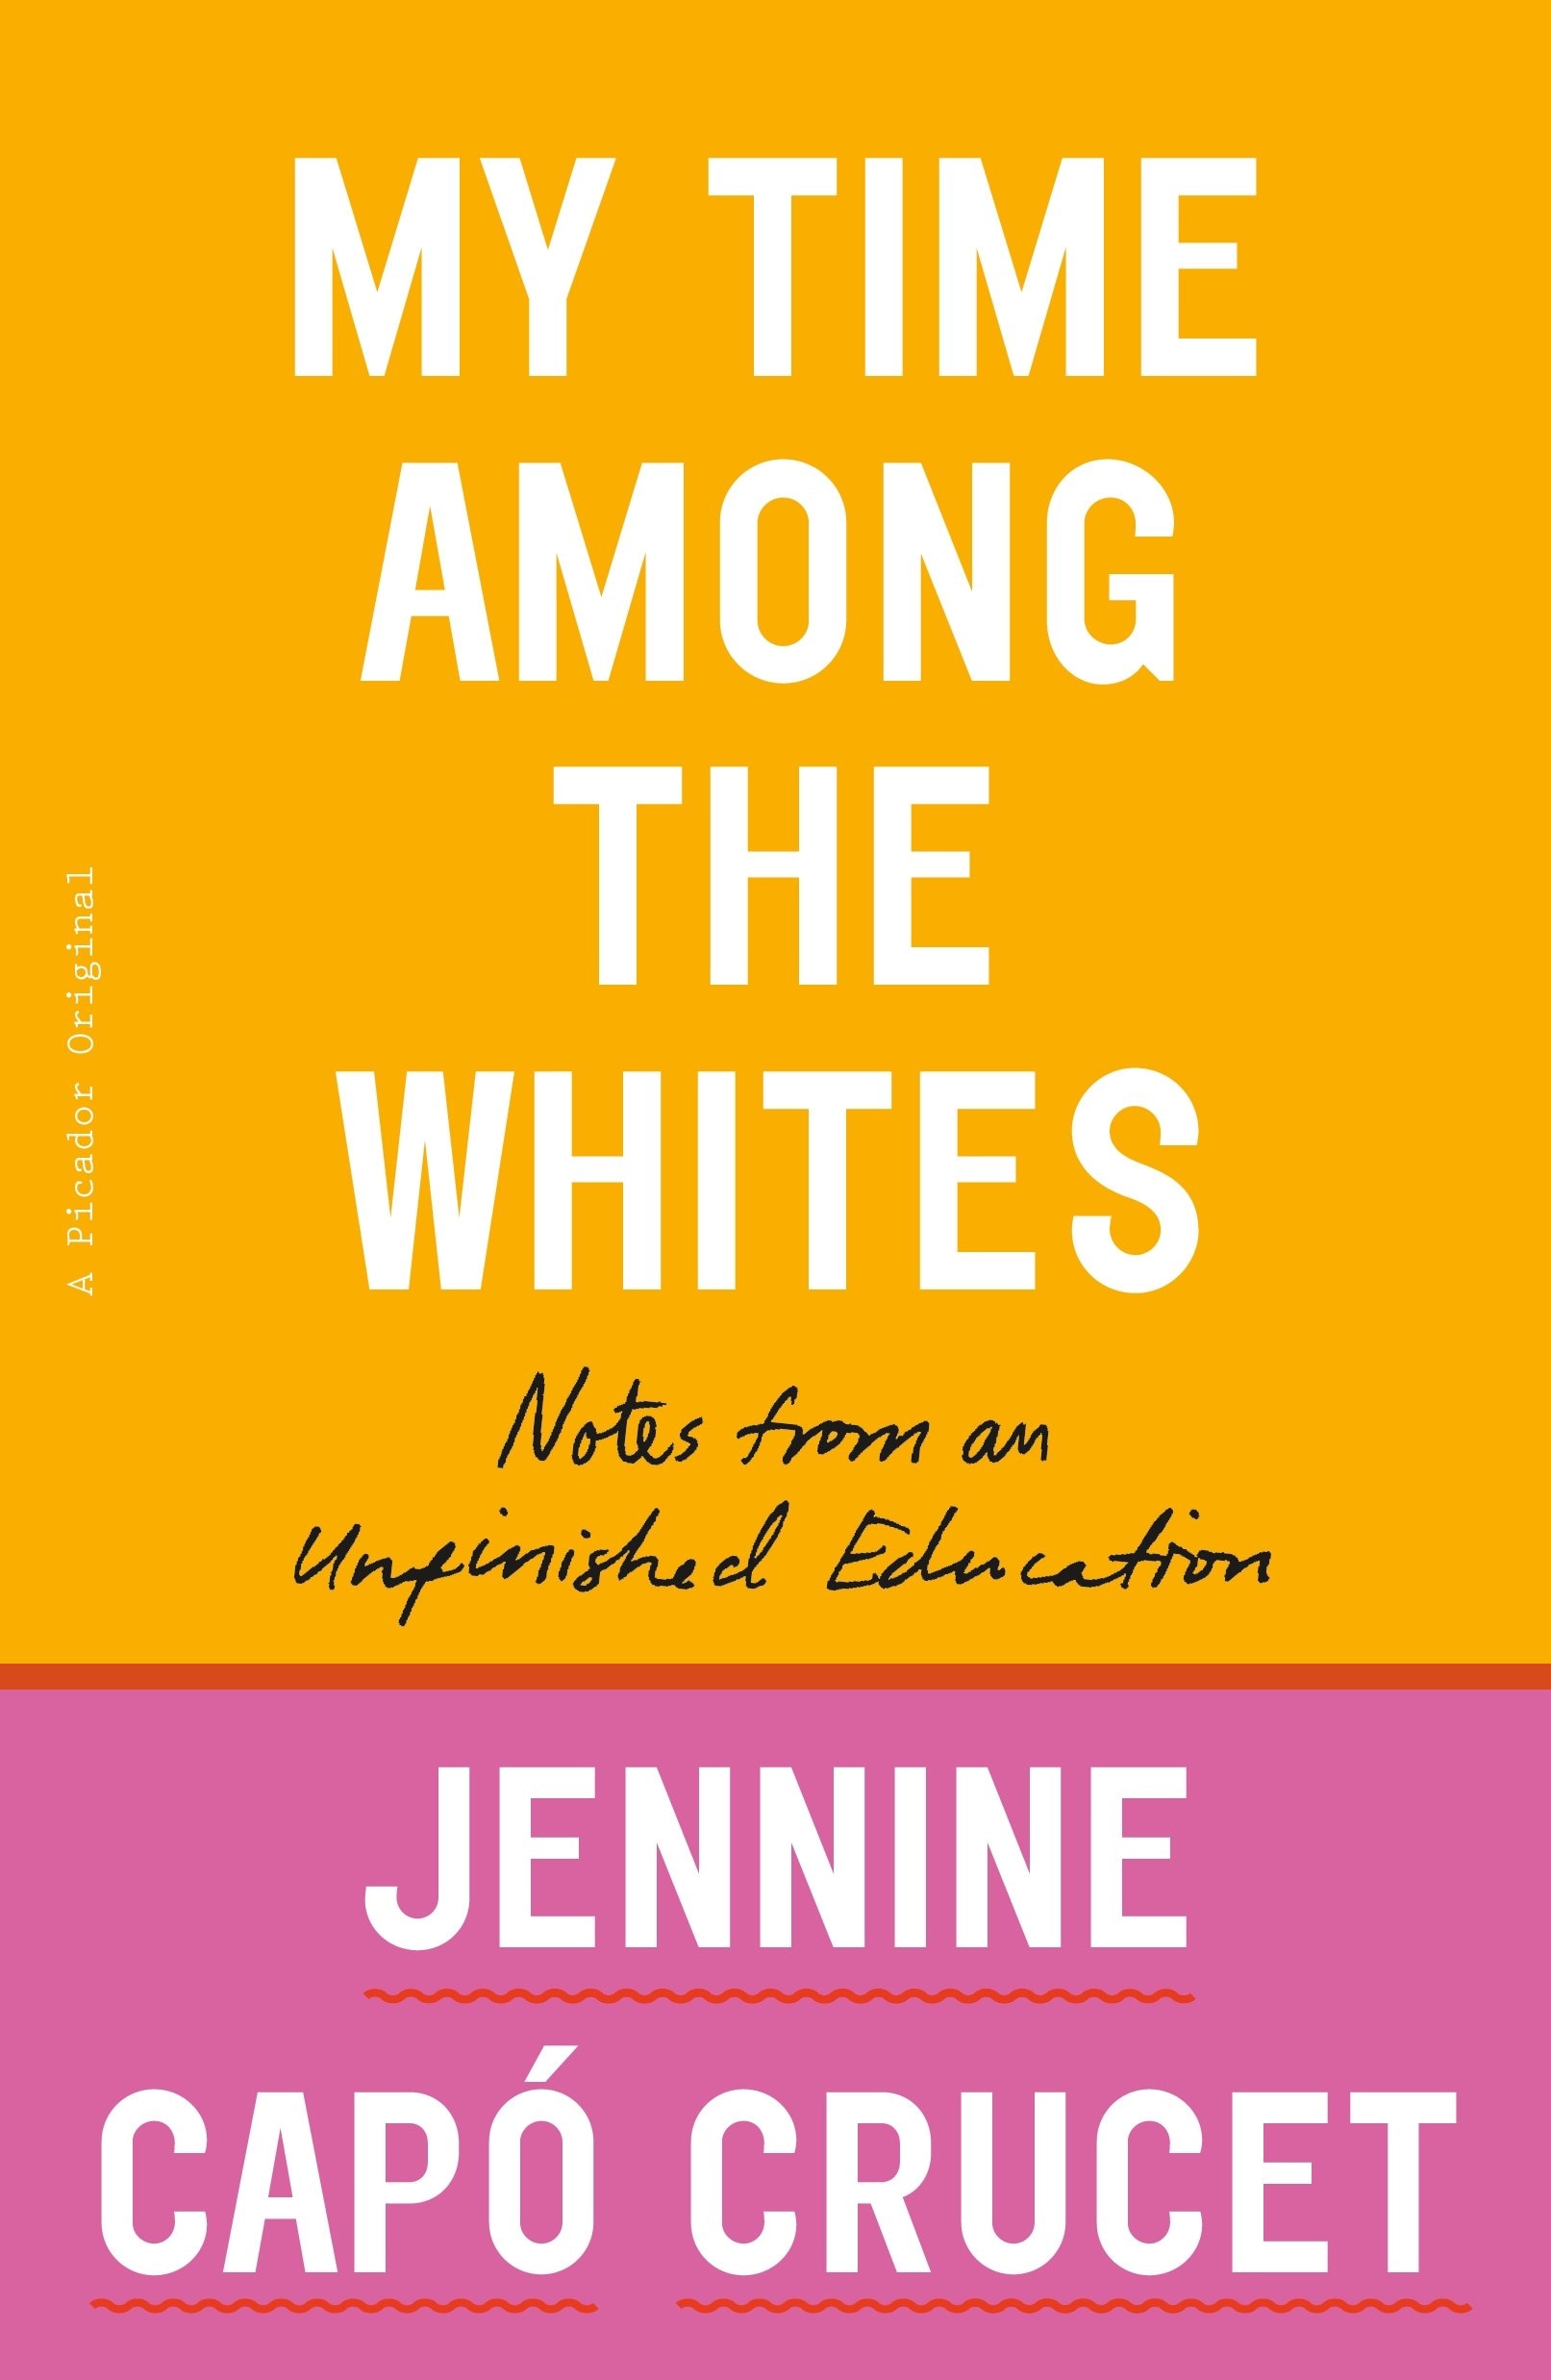 Book “My Time Among the Whites” by Jennine Capó Crucet — September 3, 2019